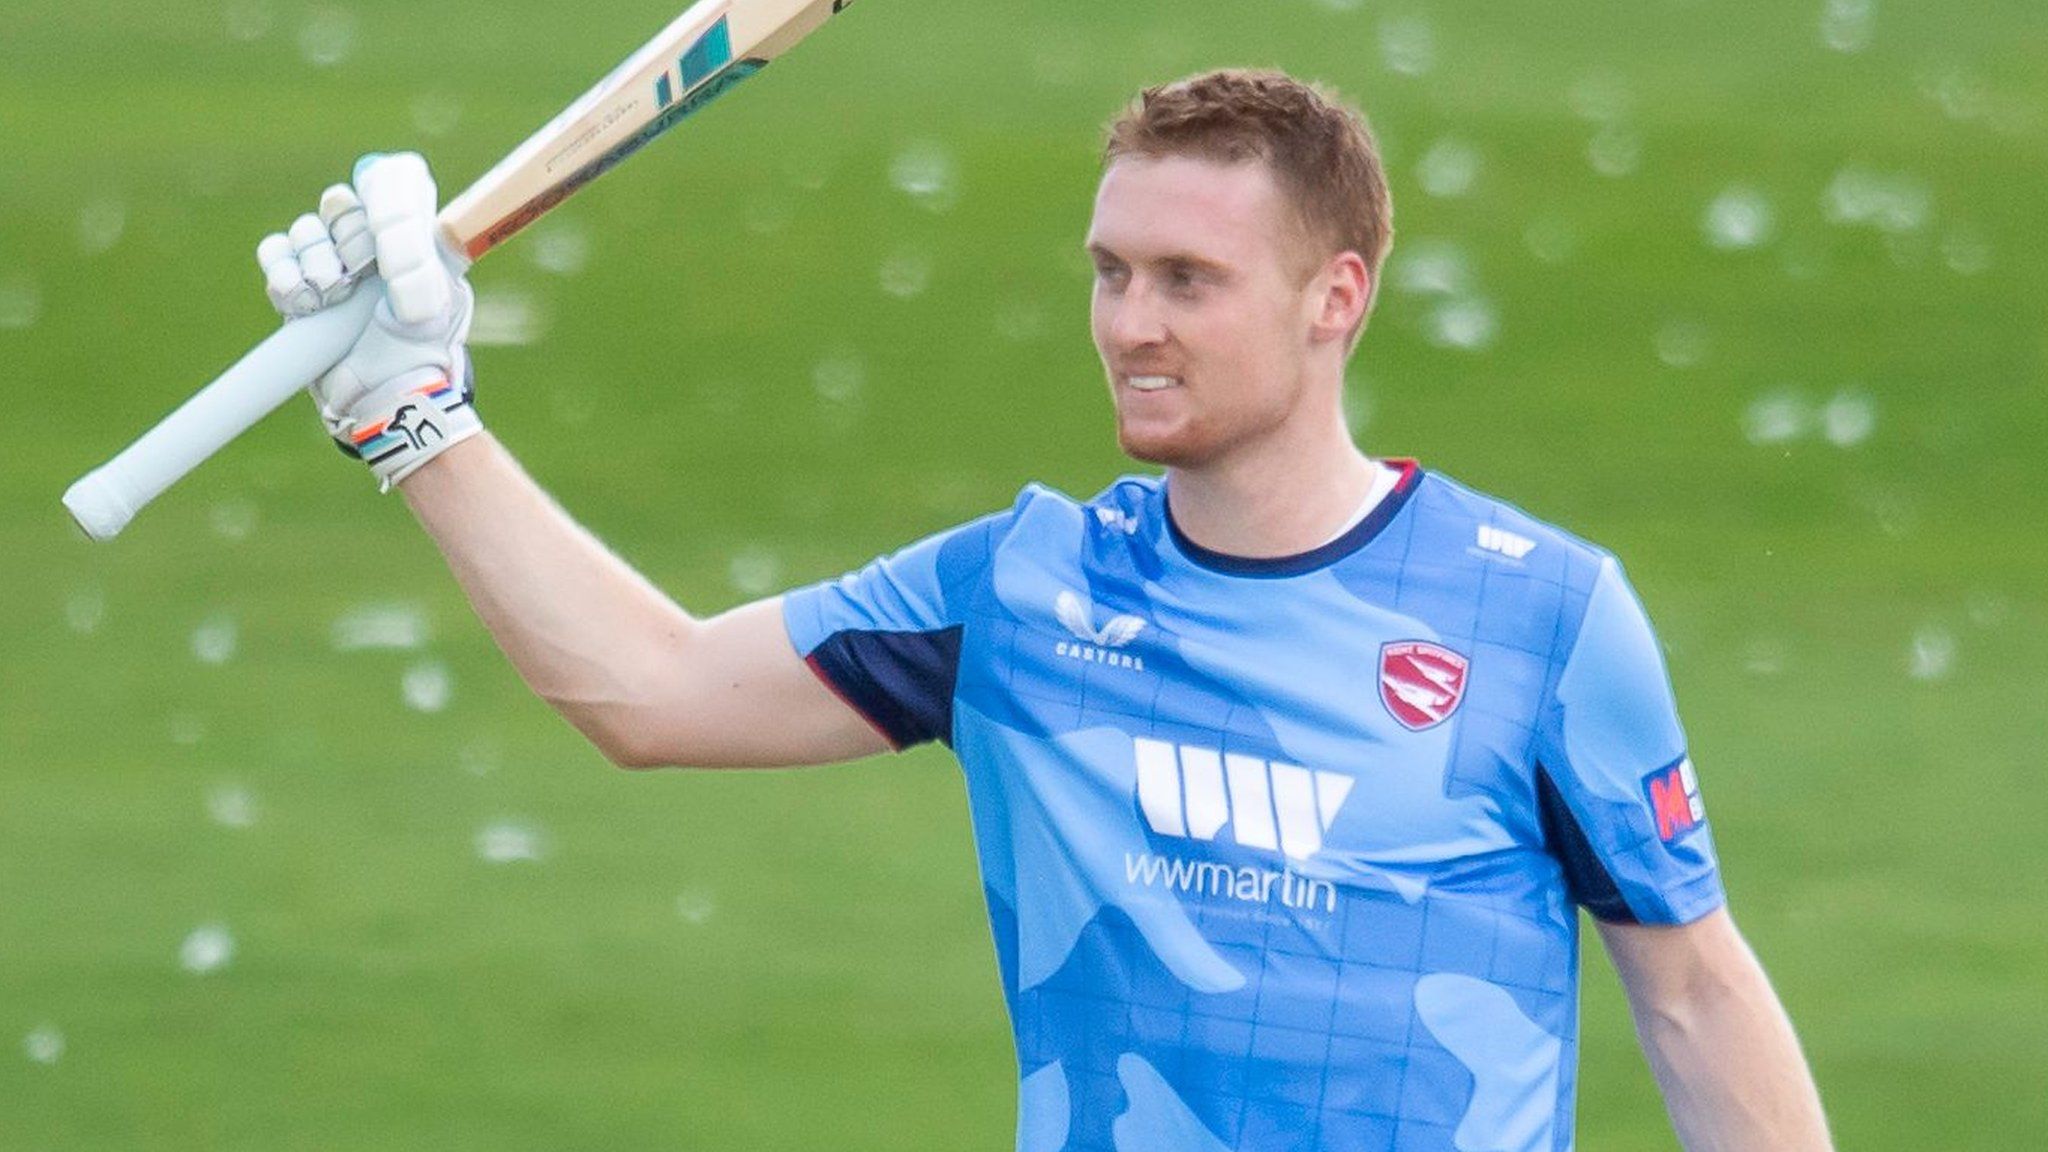 Joey Evison was one of two centurions for Kent against Yorkshire